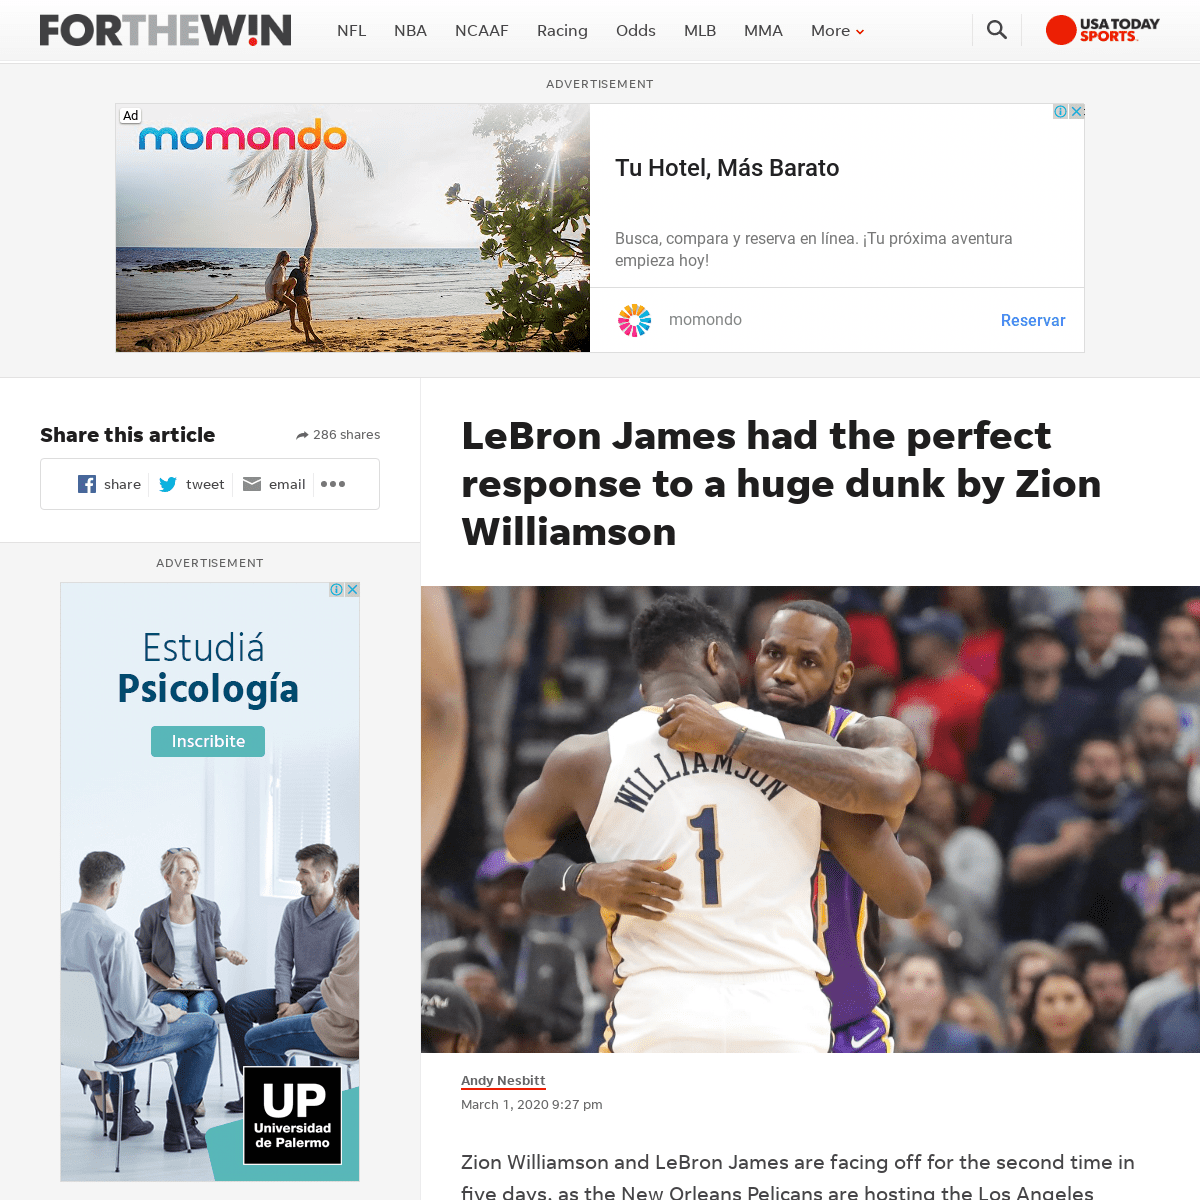 A complete backup of ftw.usatoday.com/2020/03/lakers-pelicans-lebron-james-zion-wiliamson-dunk